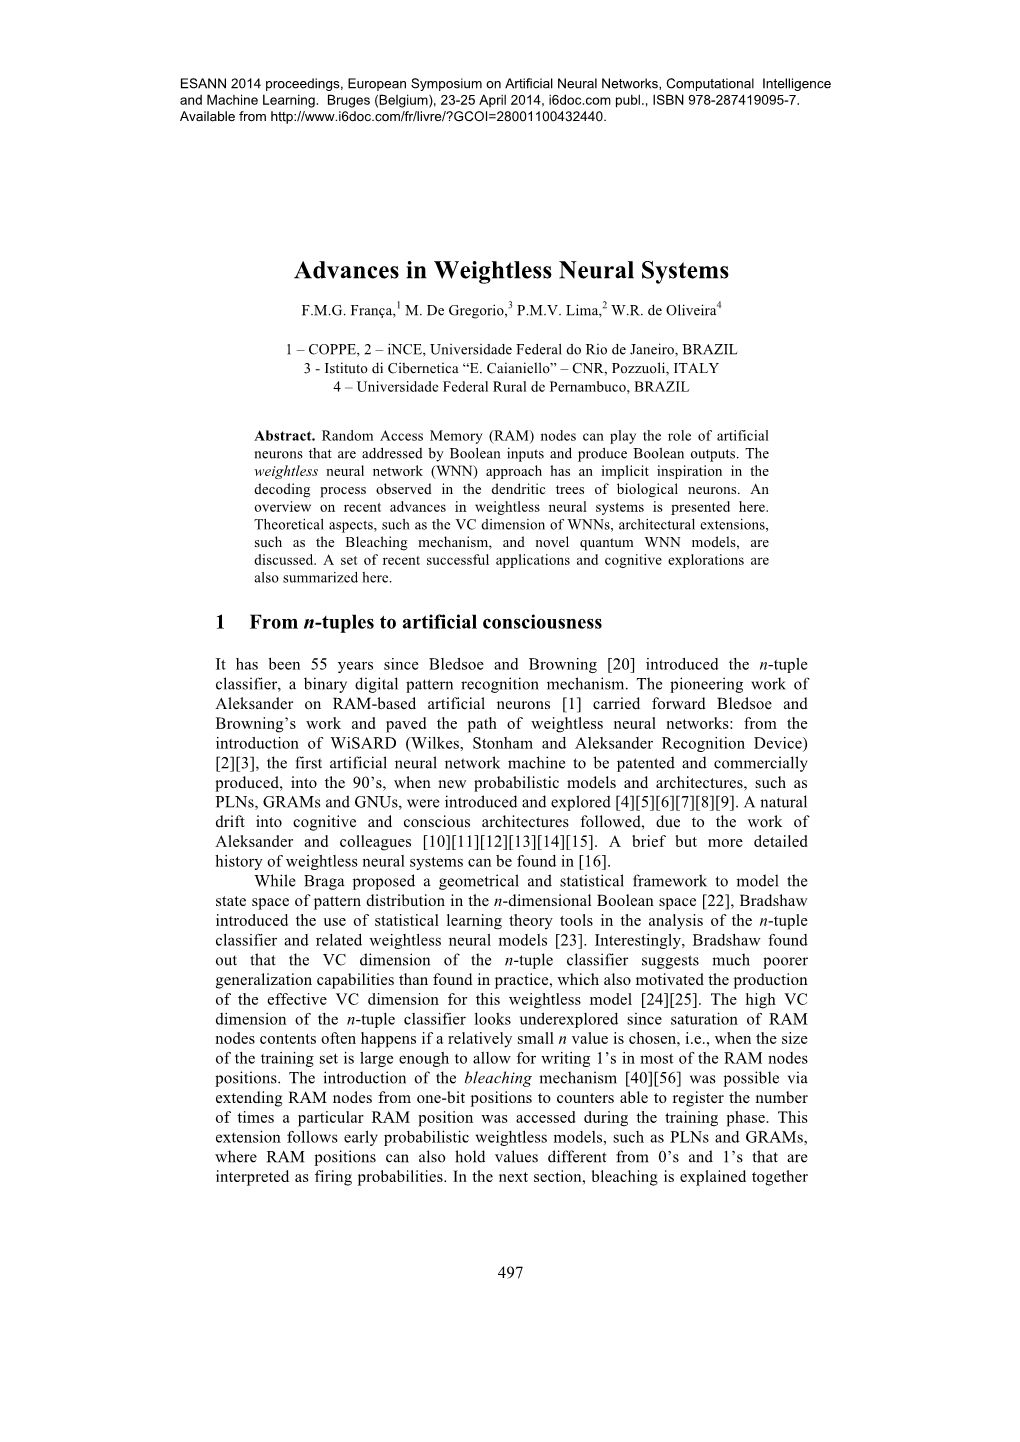 Advances in Weightless Neural Systems